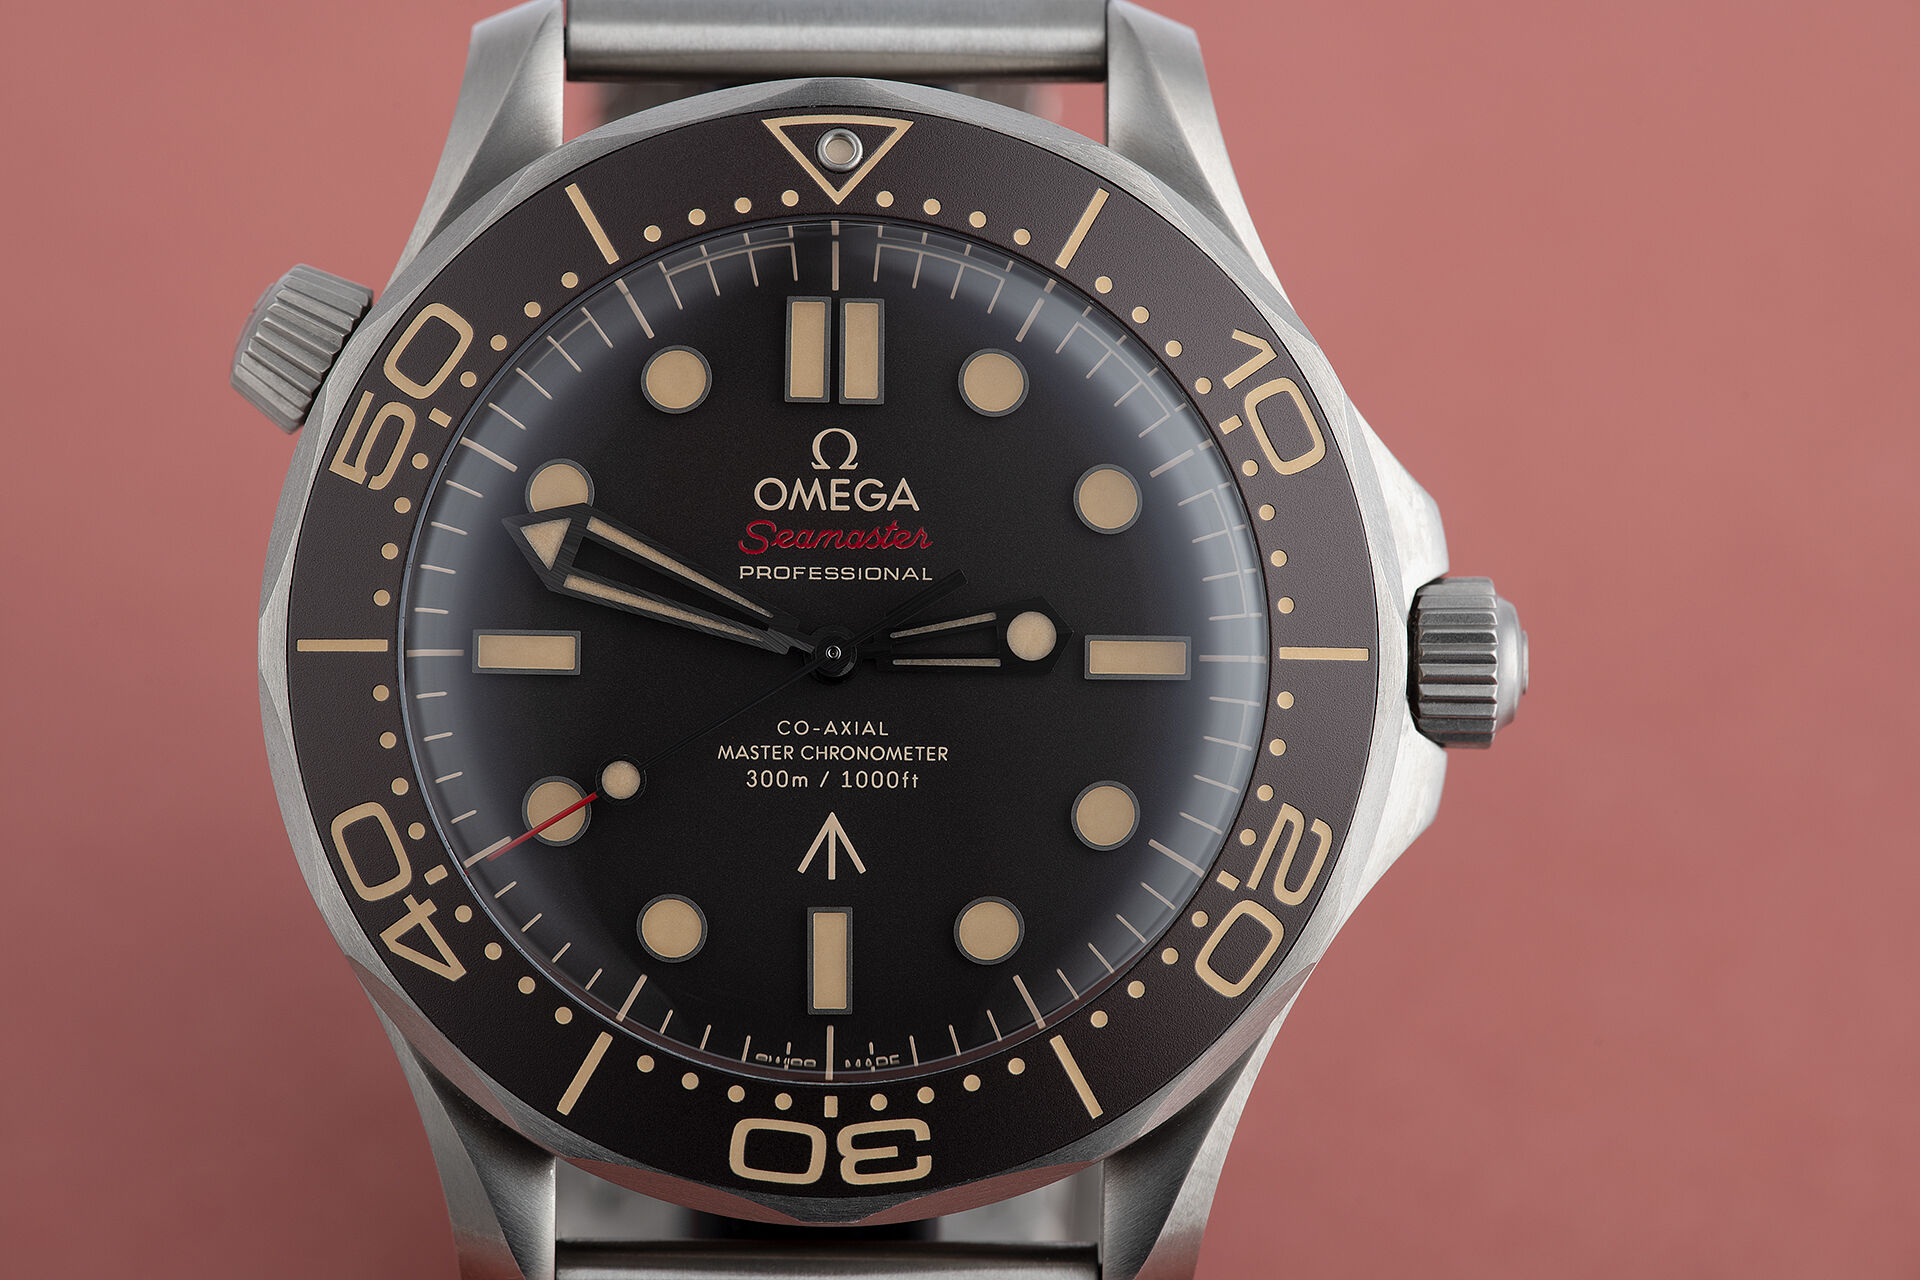 ref 210.90.42.20.01.001 | 'No Time to Die' Limited Edition | Omega Seamaster 300 007 Edition